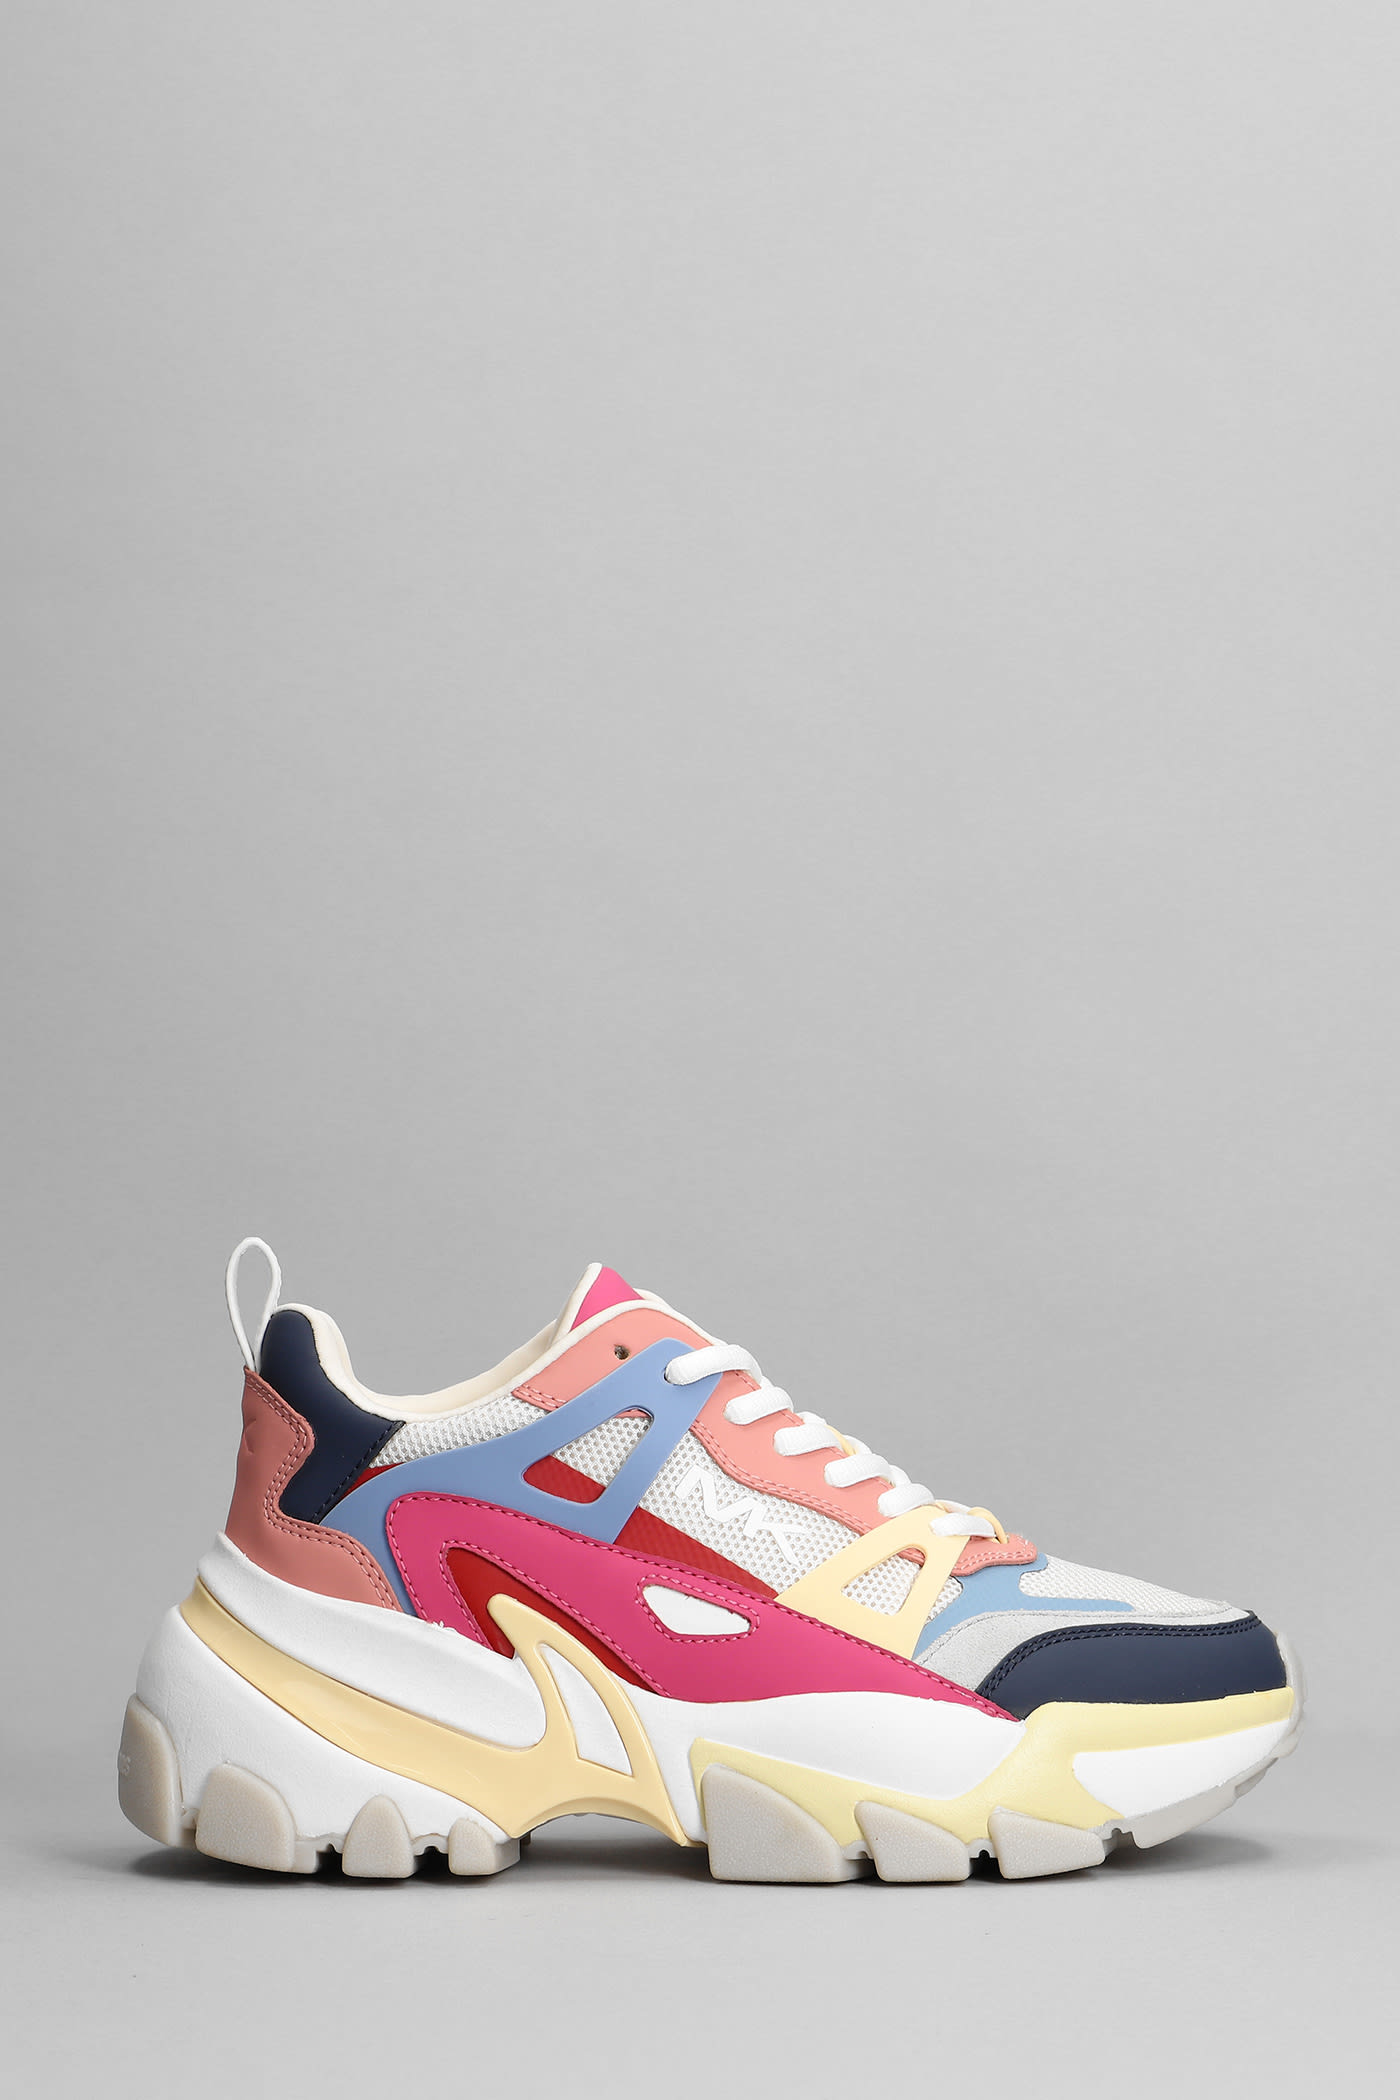 Michael Kors Nick Sneakers In Multicolor Leather And Fabric